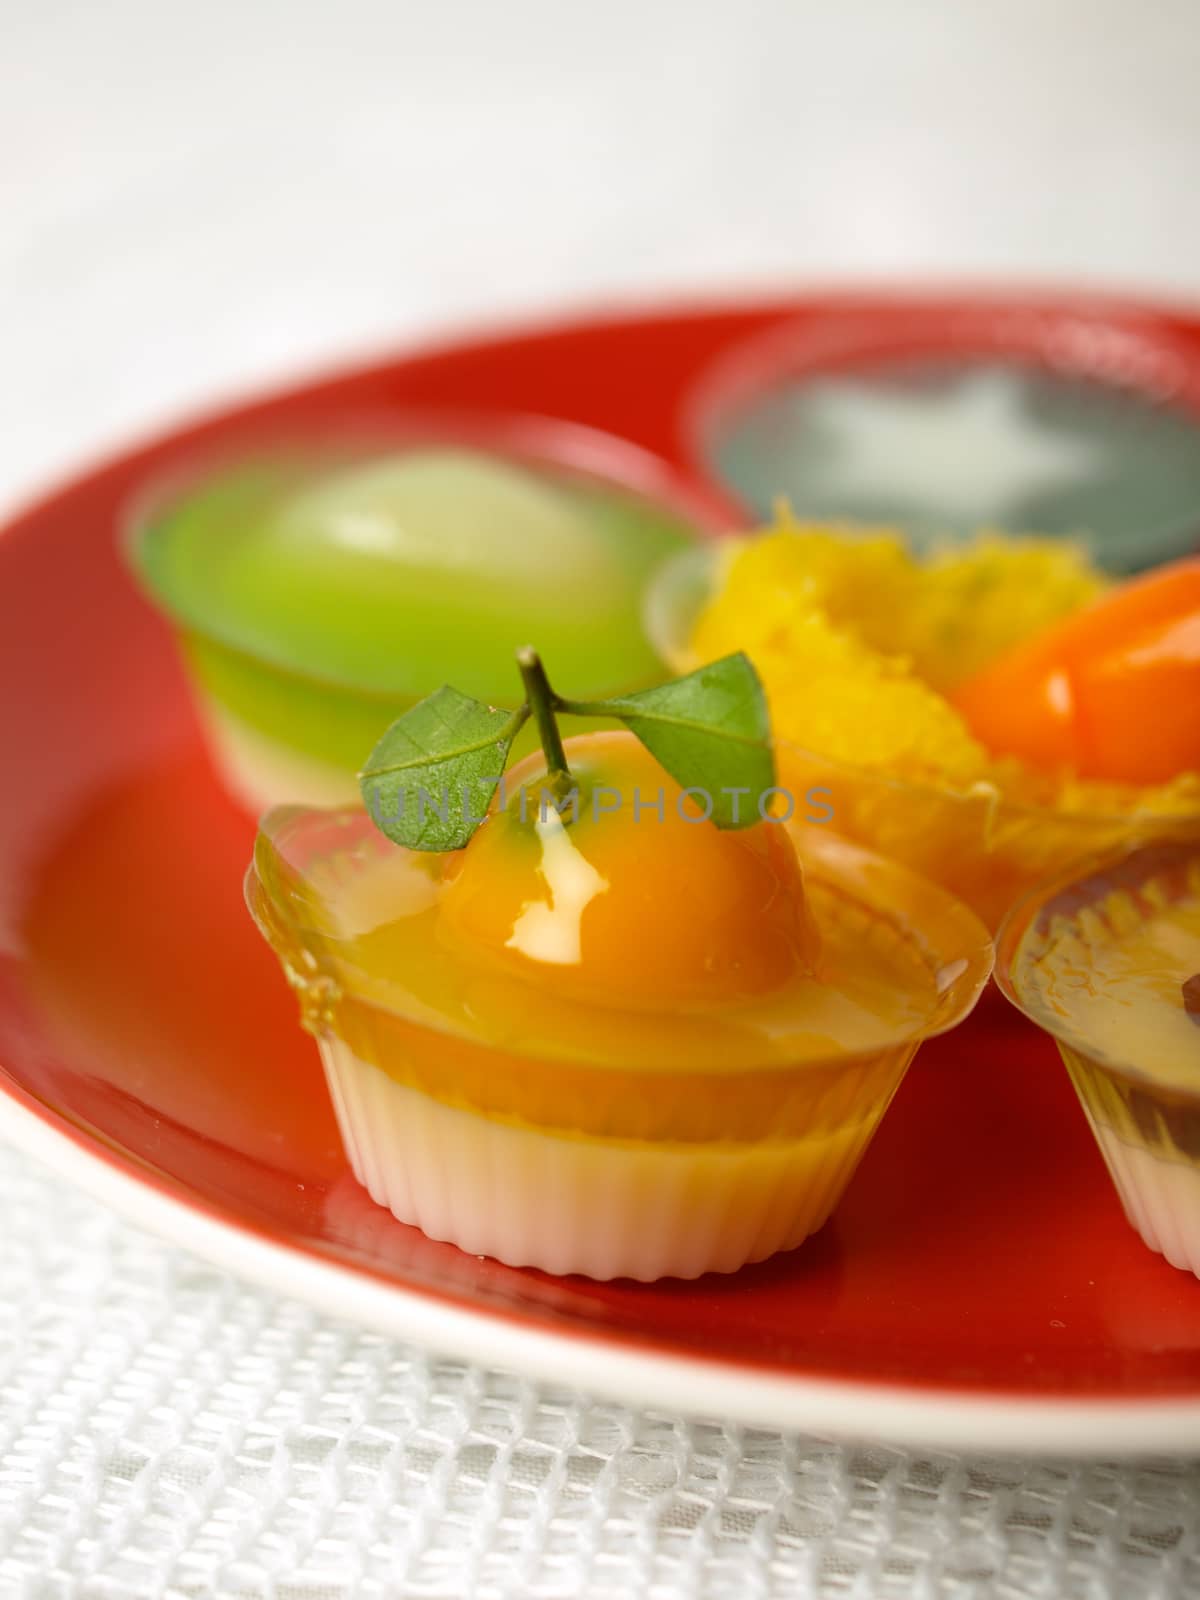 Colorful Coconut jelly Thai dessert with Look Choup , the dessert plated balls